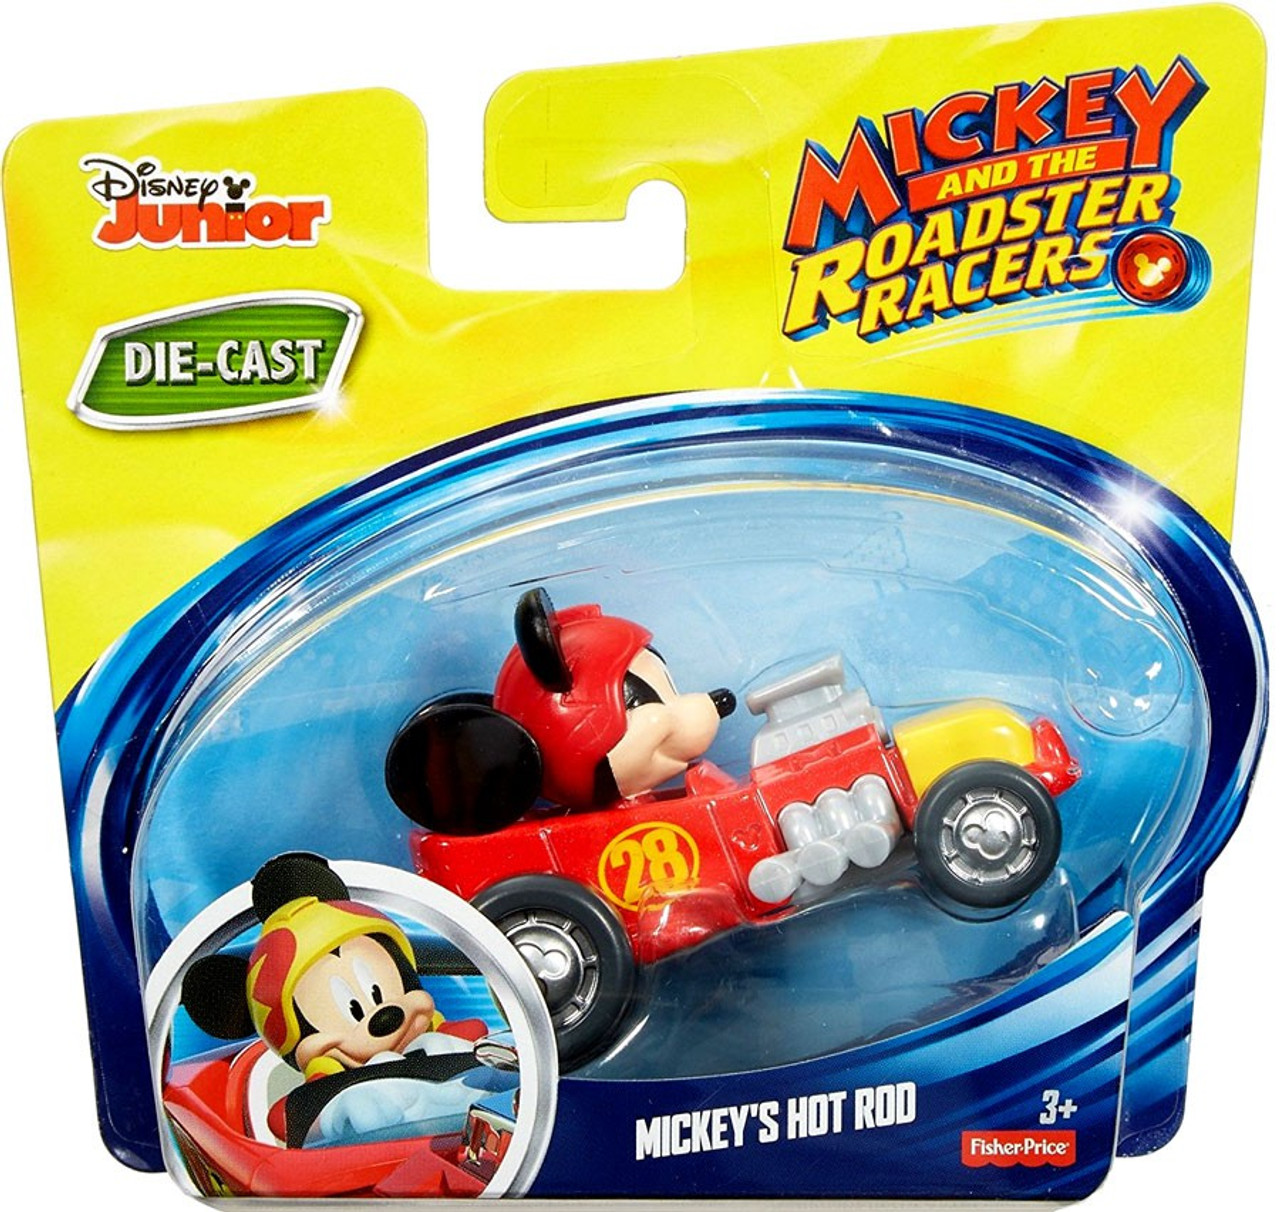 mickey and the roadster racers die cast set